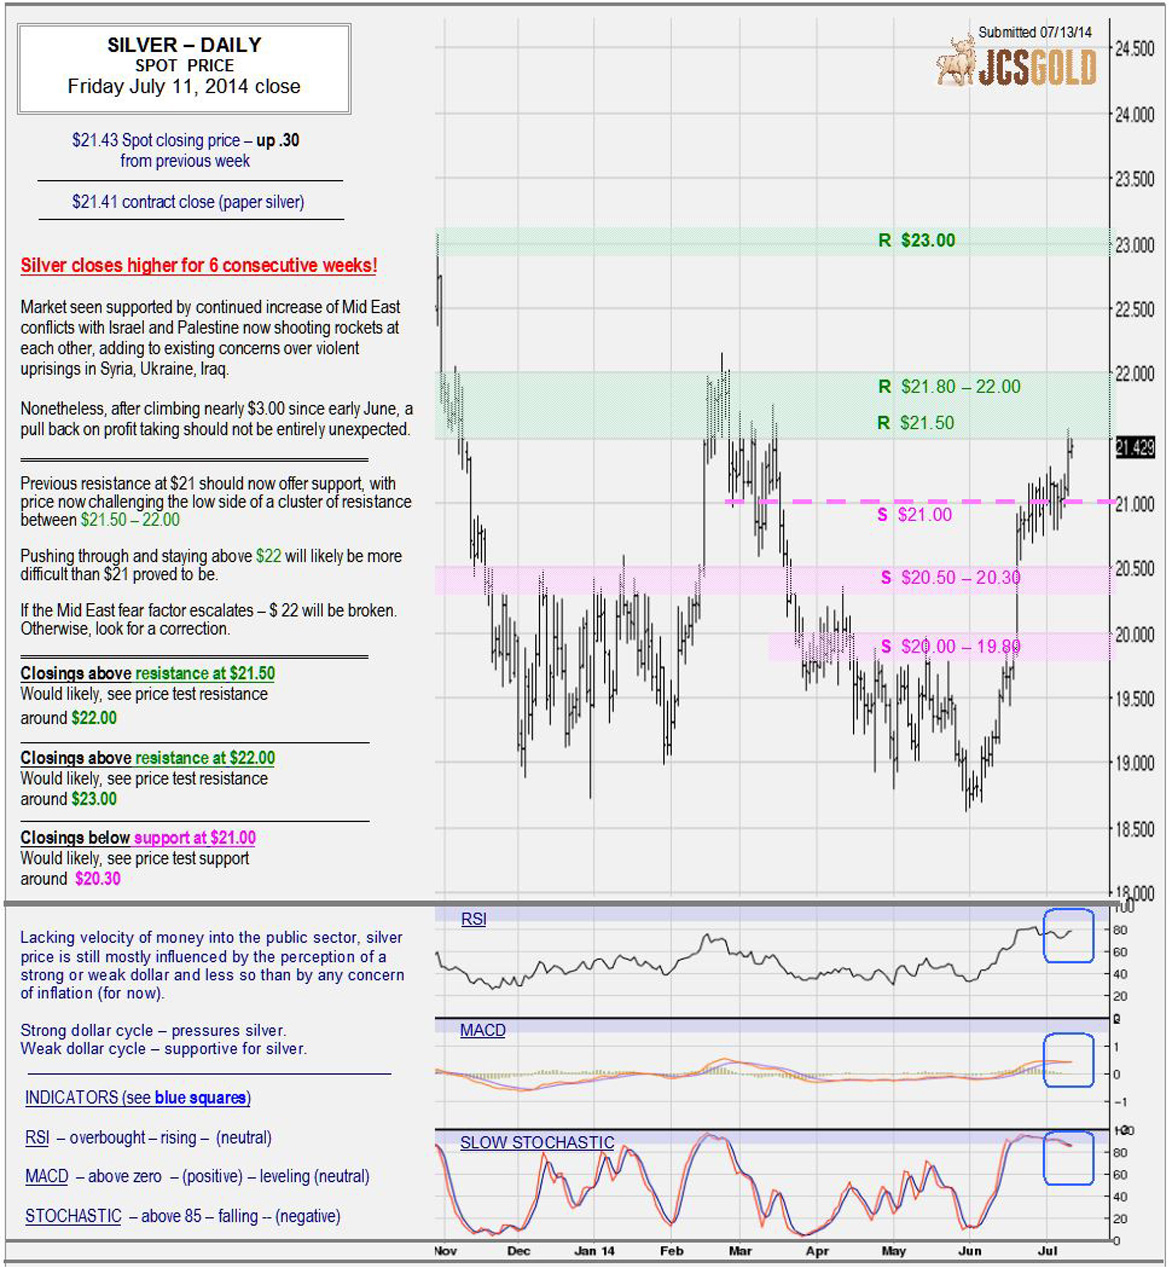 July 11, 2014 chart & commentary